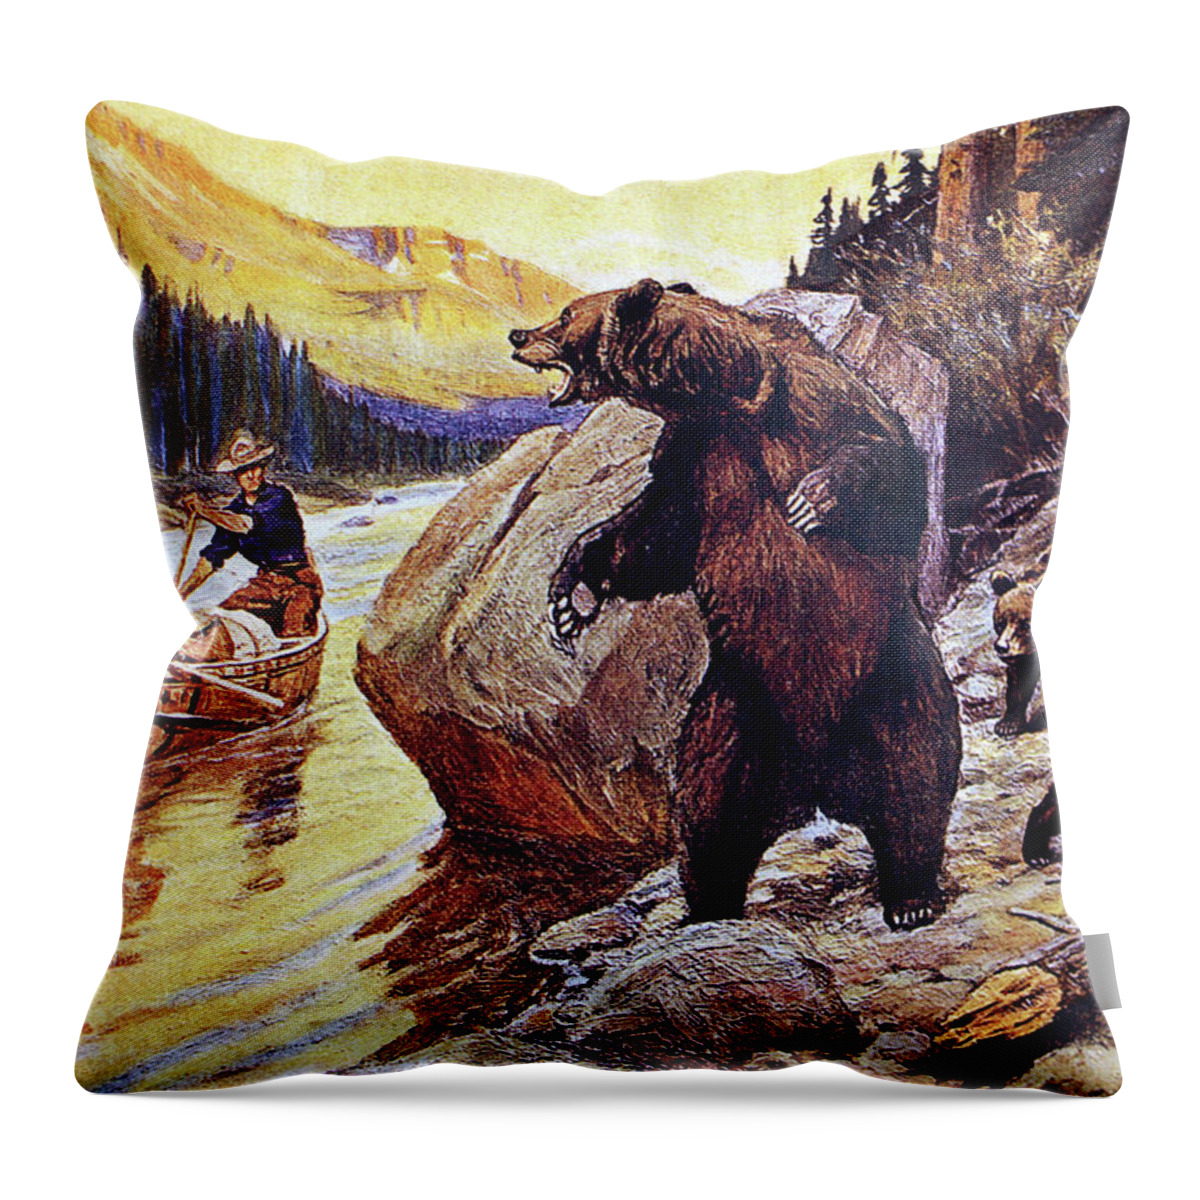 Outdoor Throw Pillow featuring the painting A Startled Moment by Philip R Goodwin